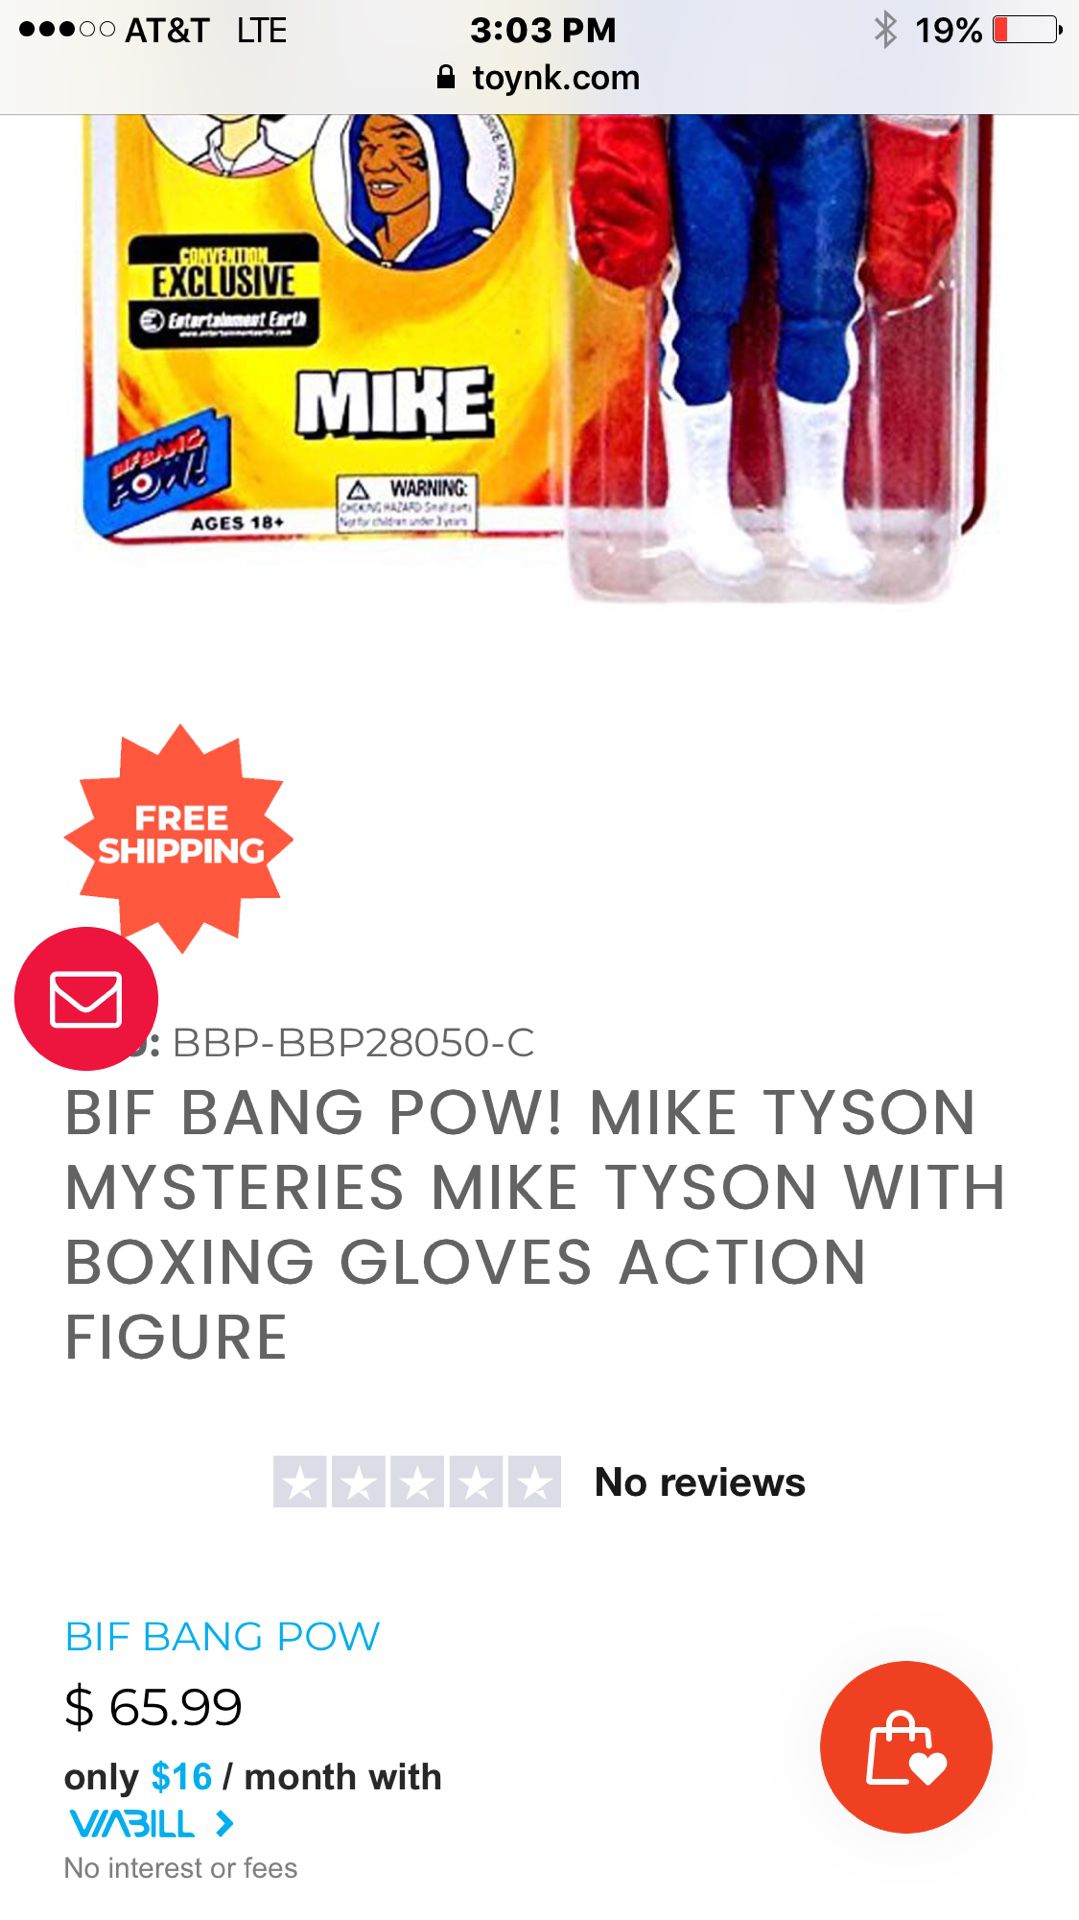 Collectible Mike Tyson action figure